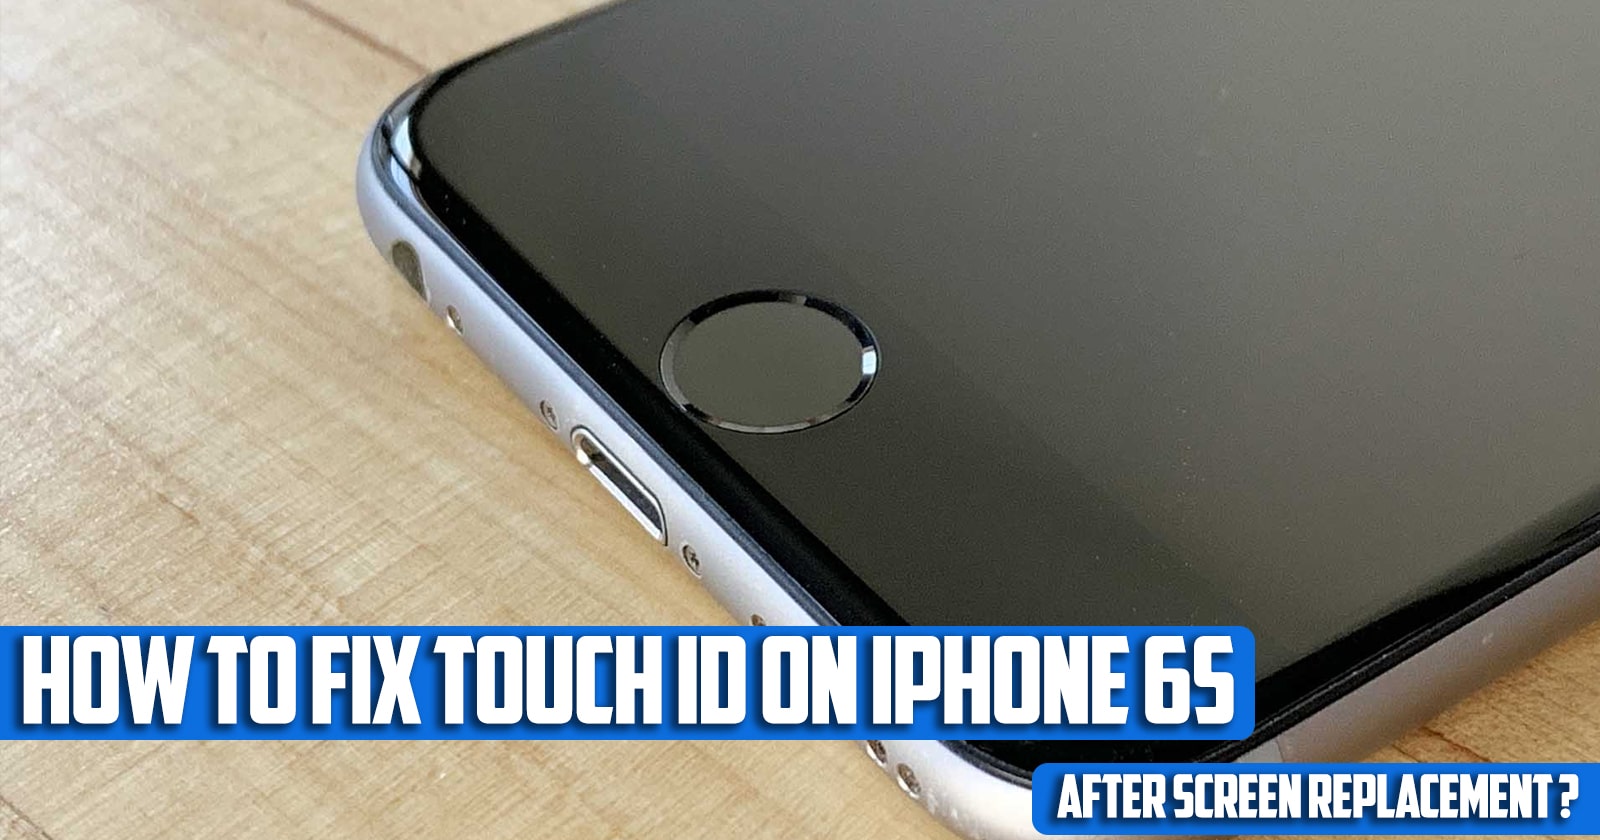 How to fix touch id on iphone 6s after screen replacement